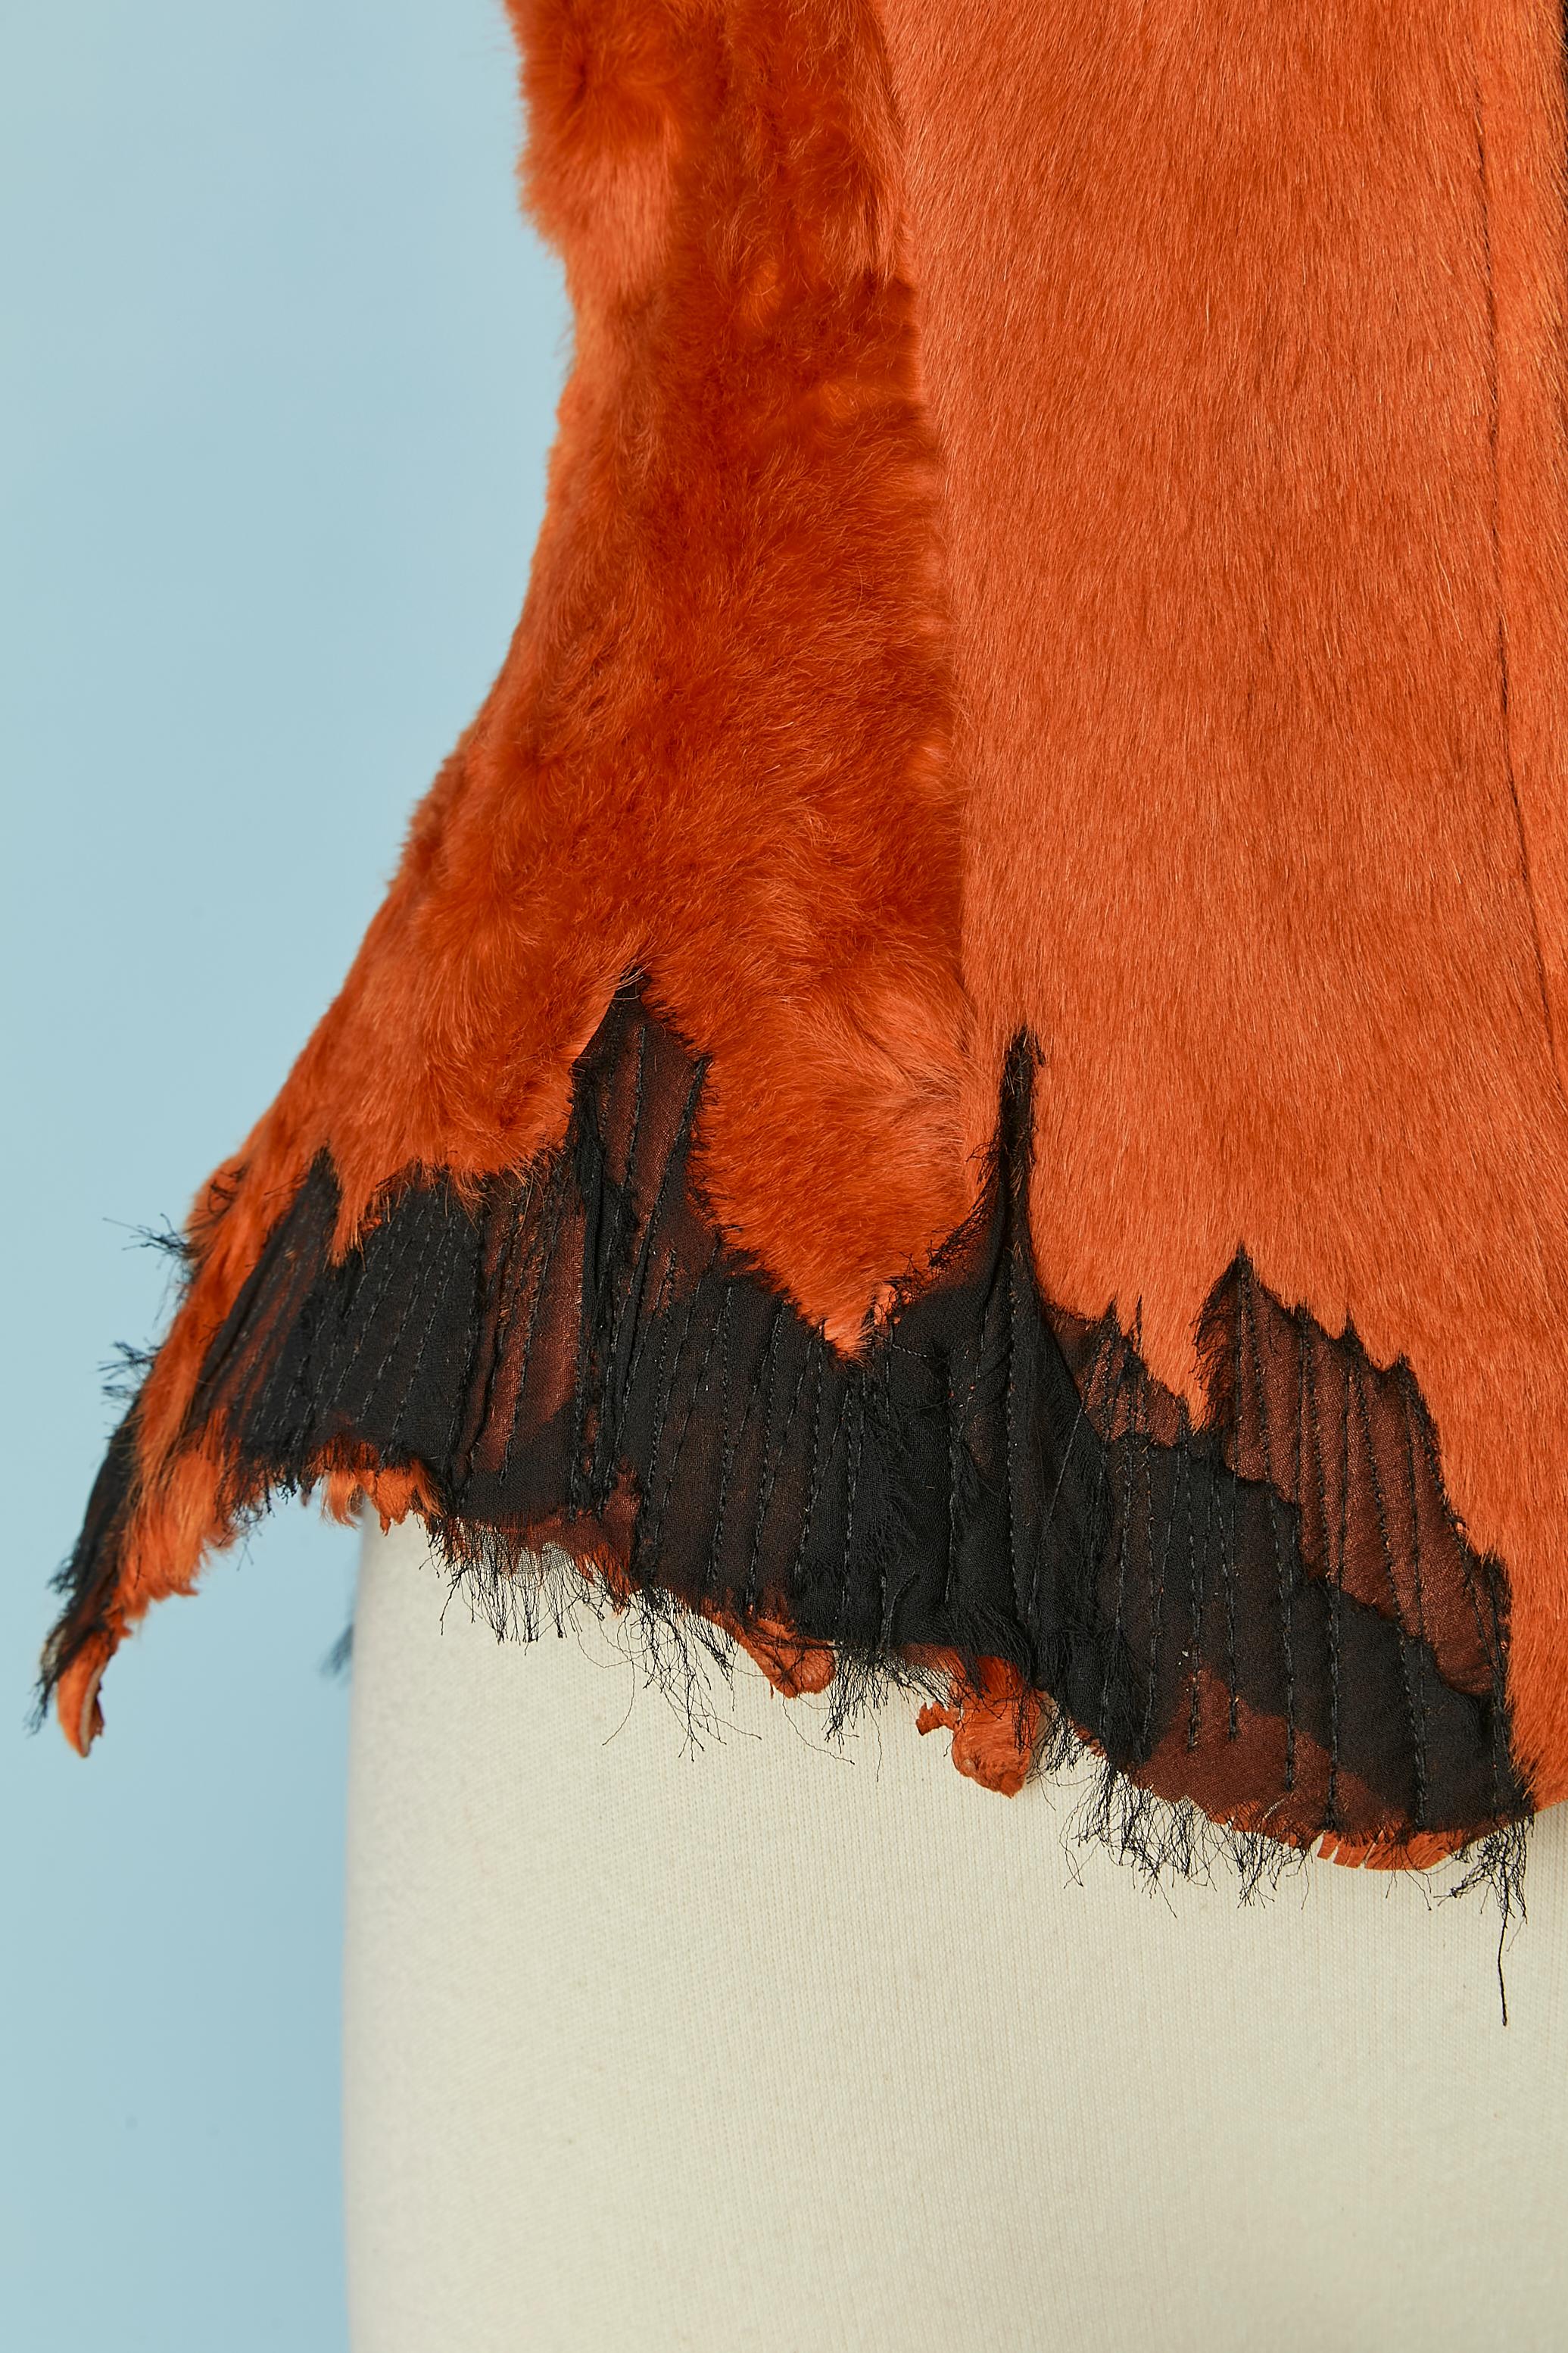 Orange furs vest with zip closure in the middle font. Top-stitched on the edge on black chiffon . No fabric composition tag but the furs is probably cow and lining in rayon ( printed)
Oscar Carvallo was born in Caracas, Venezuela. As a child, he was